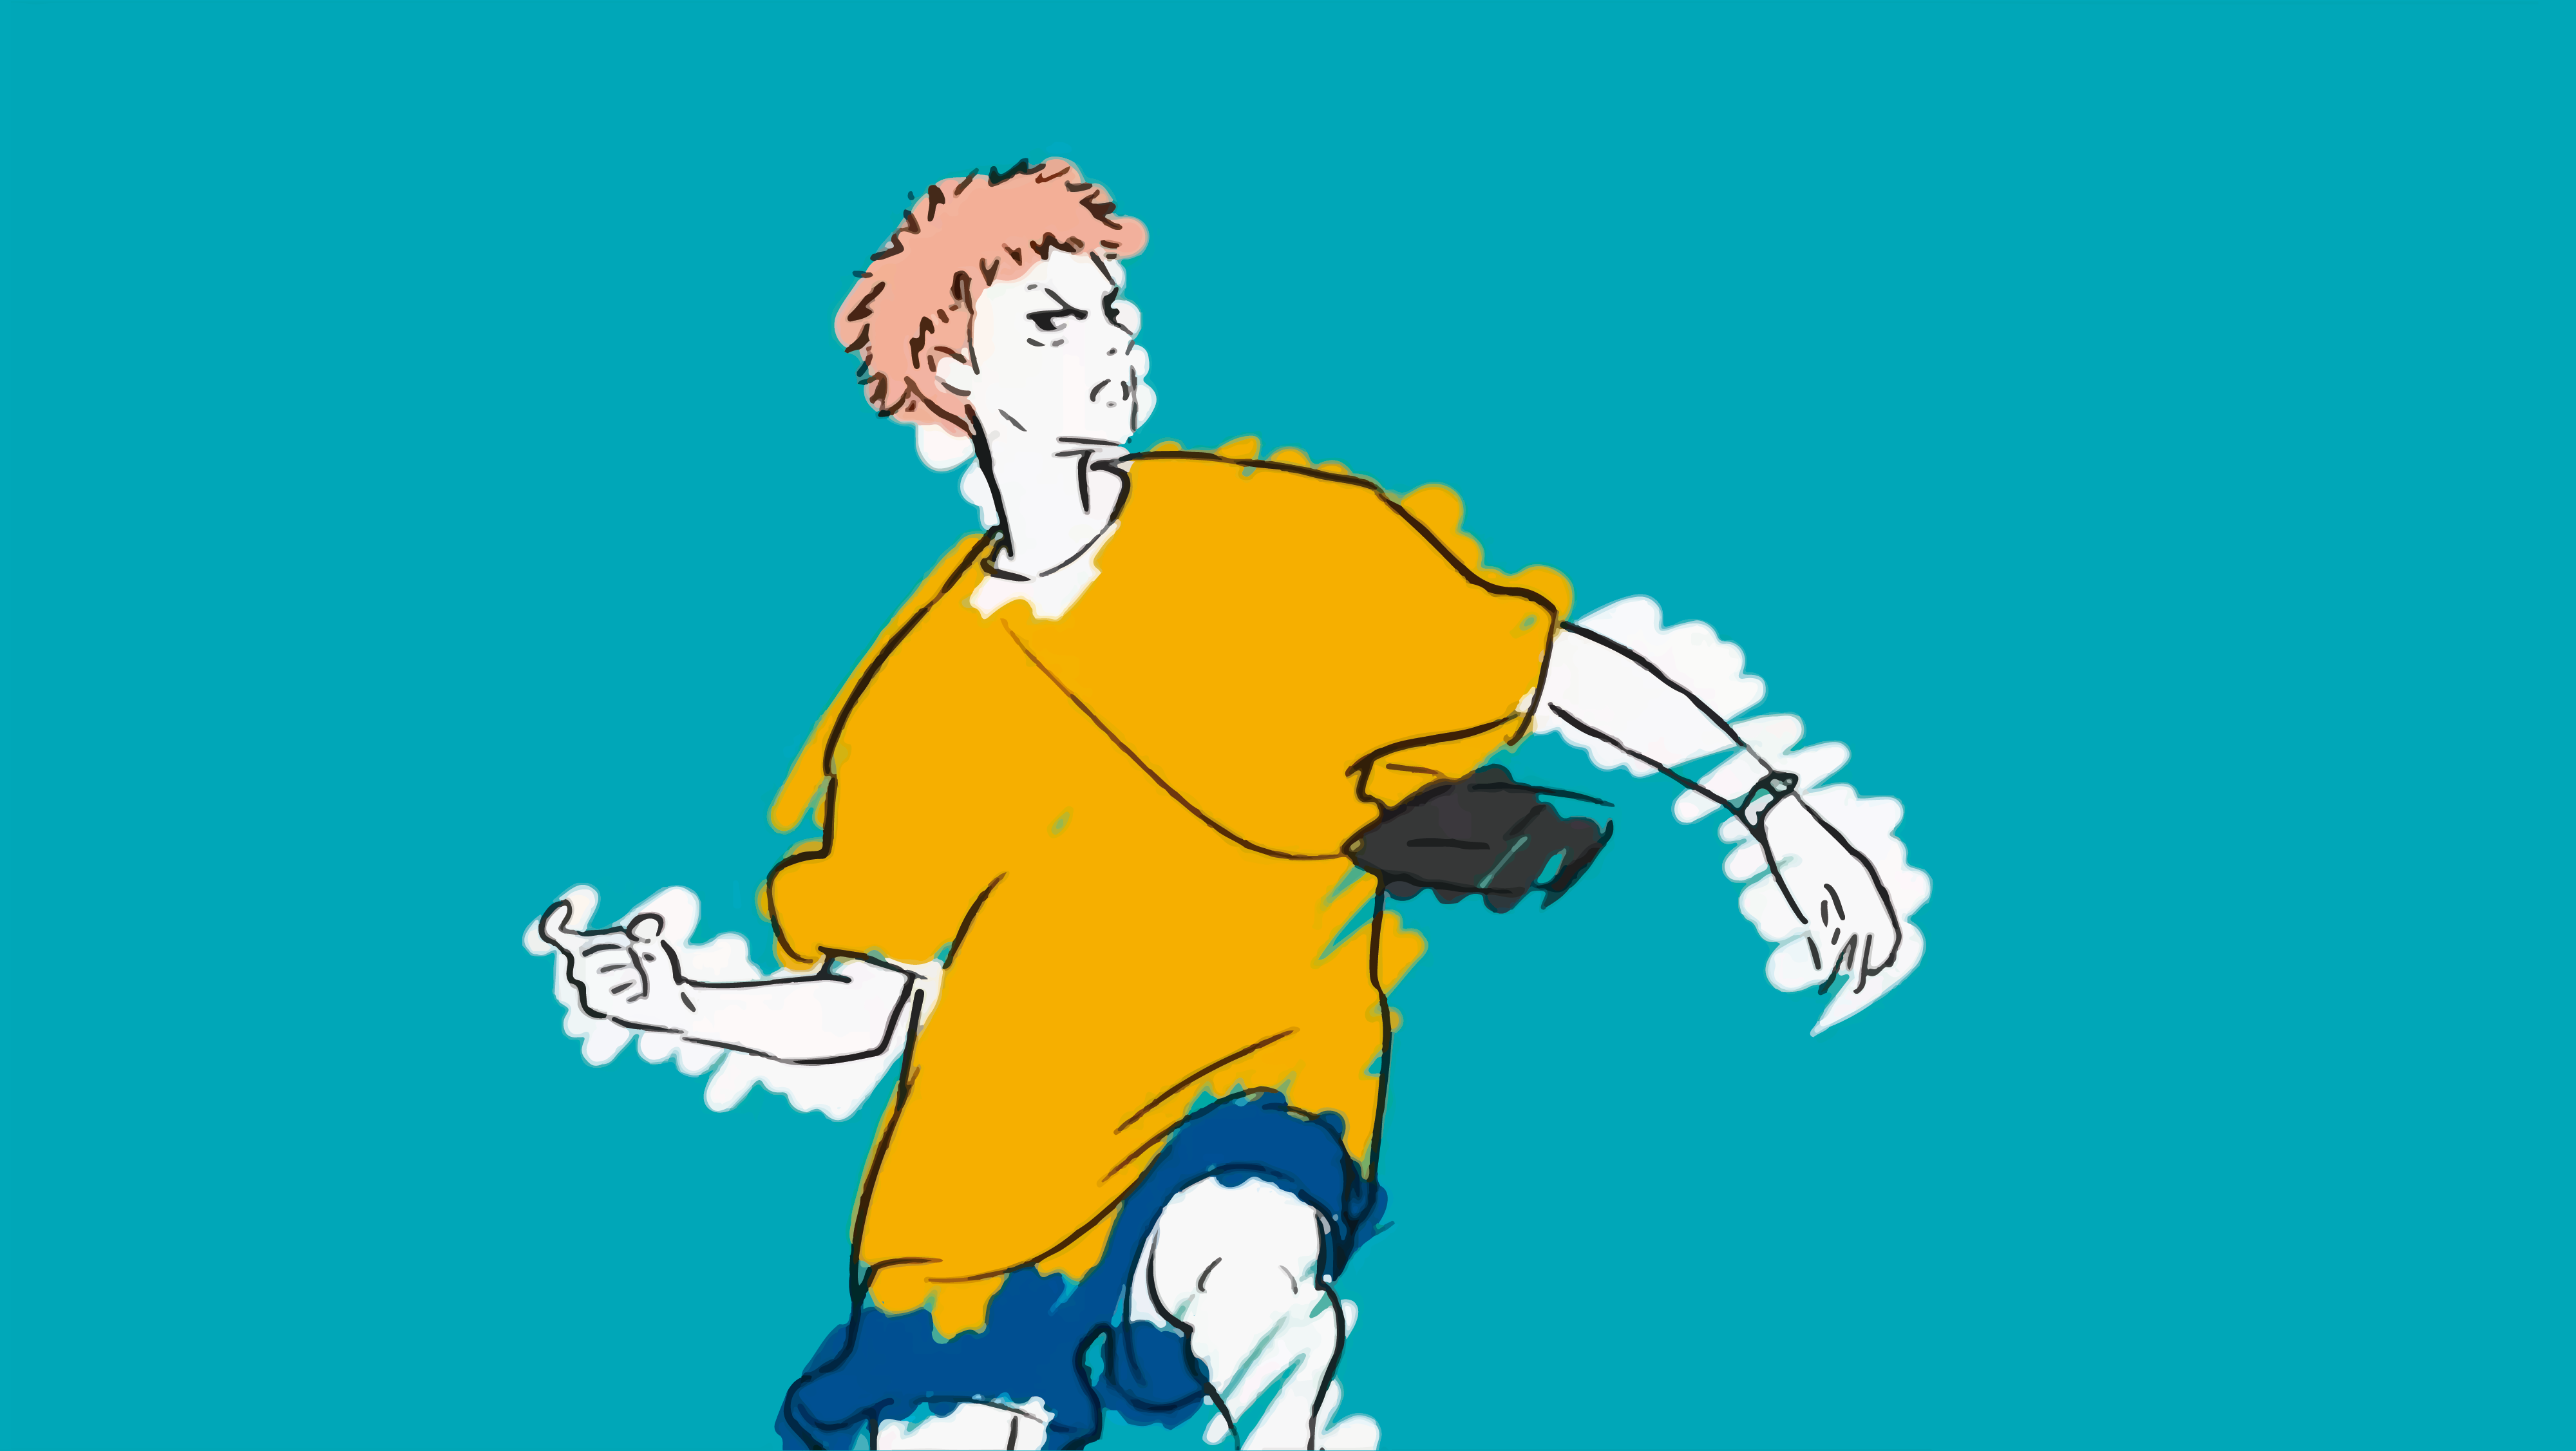 Some HD wallpaper from the ED: JuJutsuKaisen